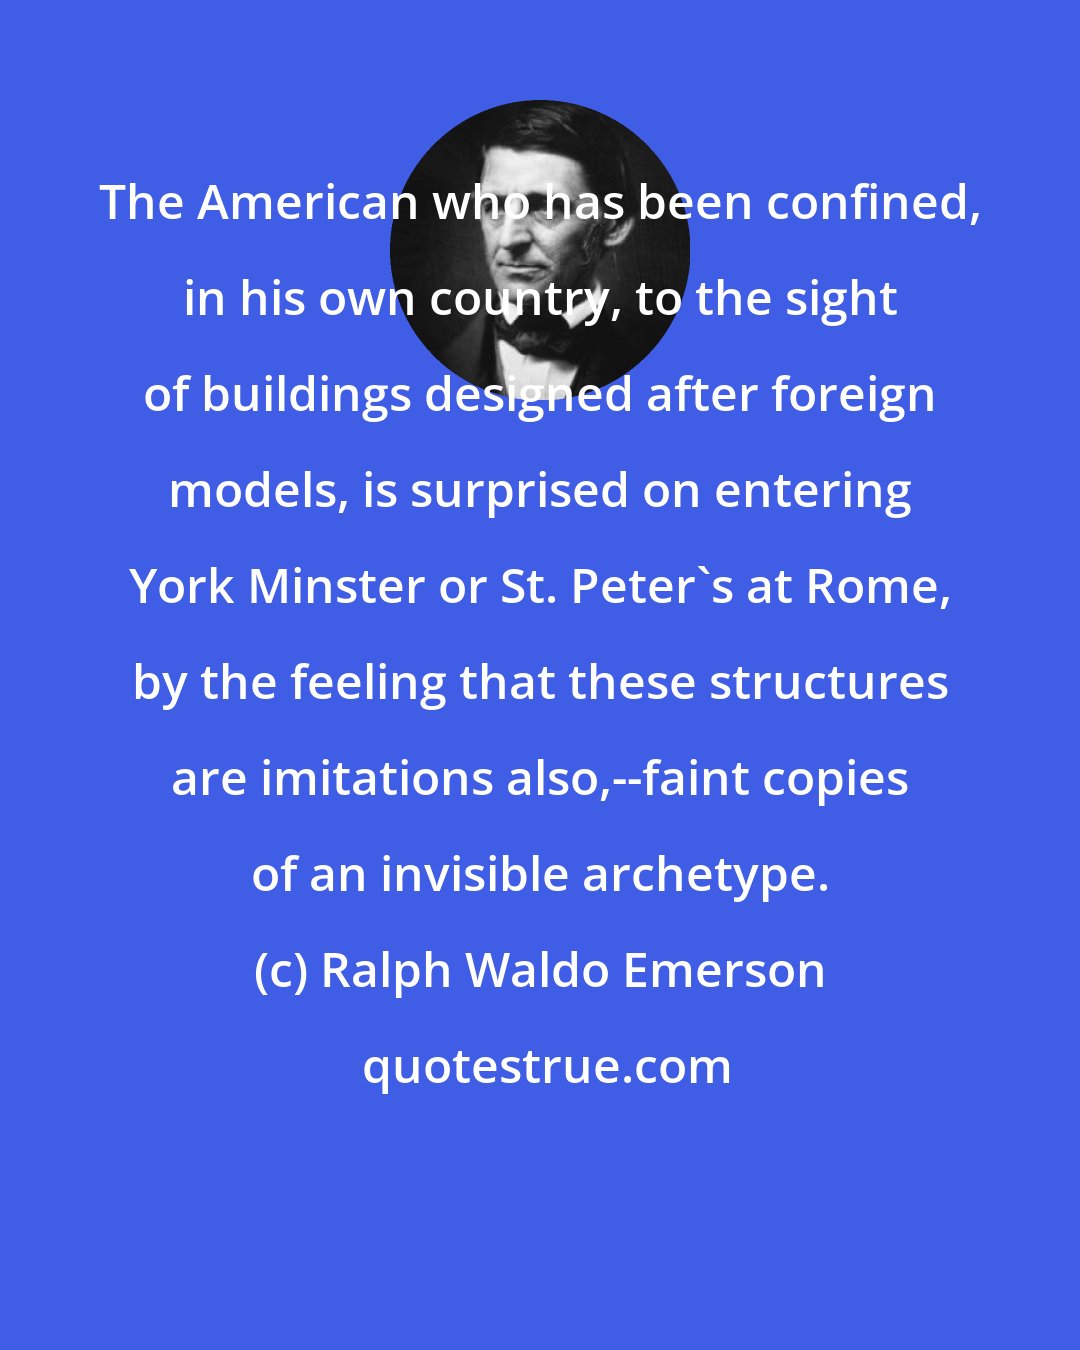 Ralph Waldo Emerson: The American who has been confined, in his own country, to the sight of buildings designed after foreign models, is surprised on entering York Minster or St. Peter's at Rome, by the feeling that these structures are imitations also,--faint copies of an invisible archetype.